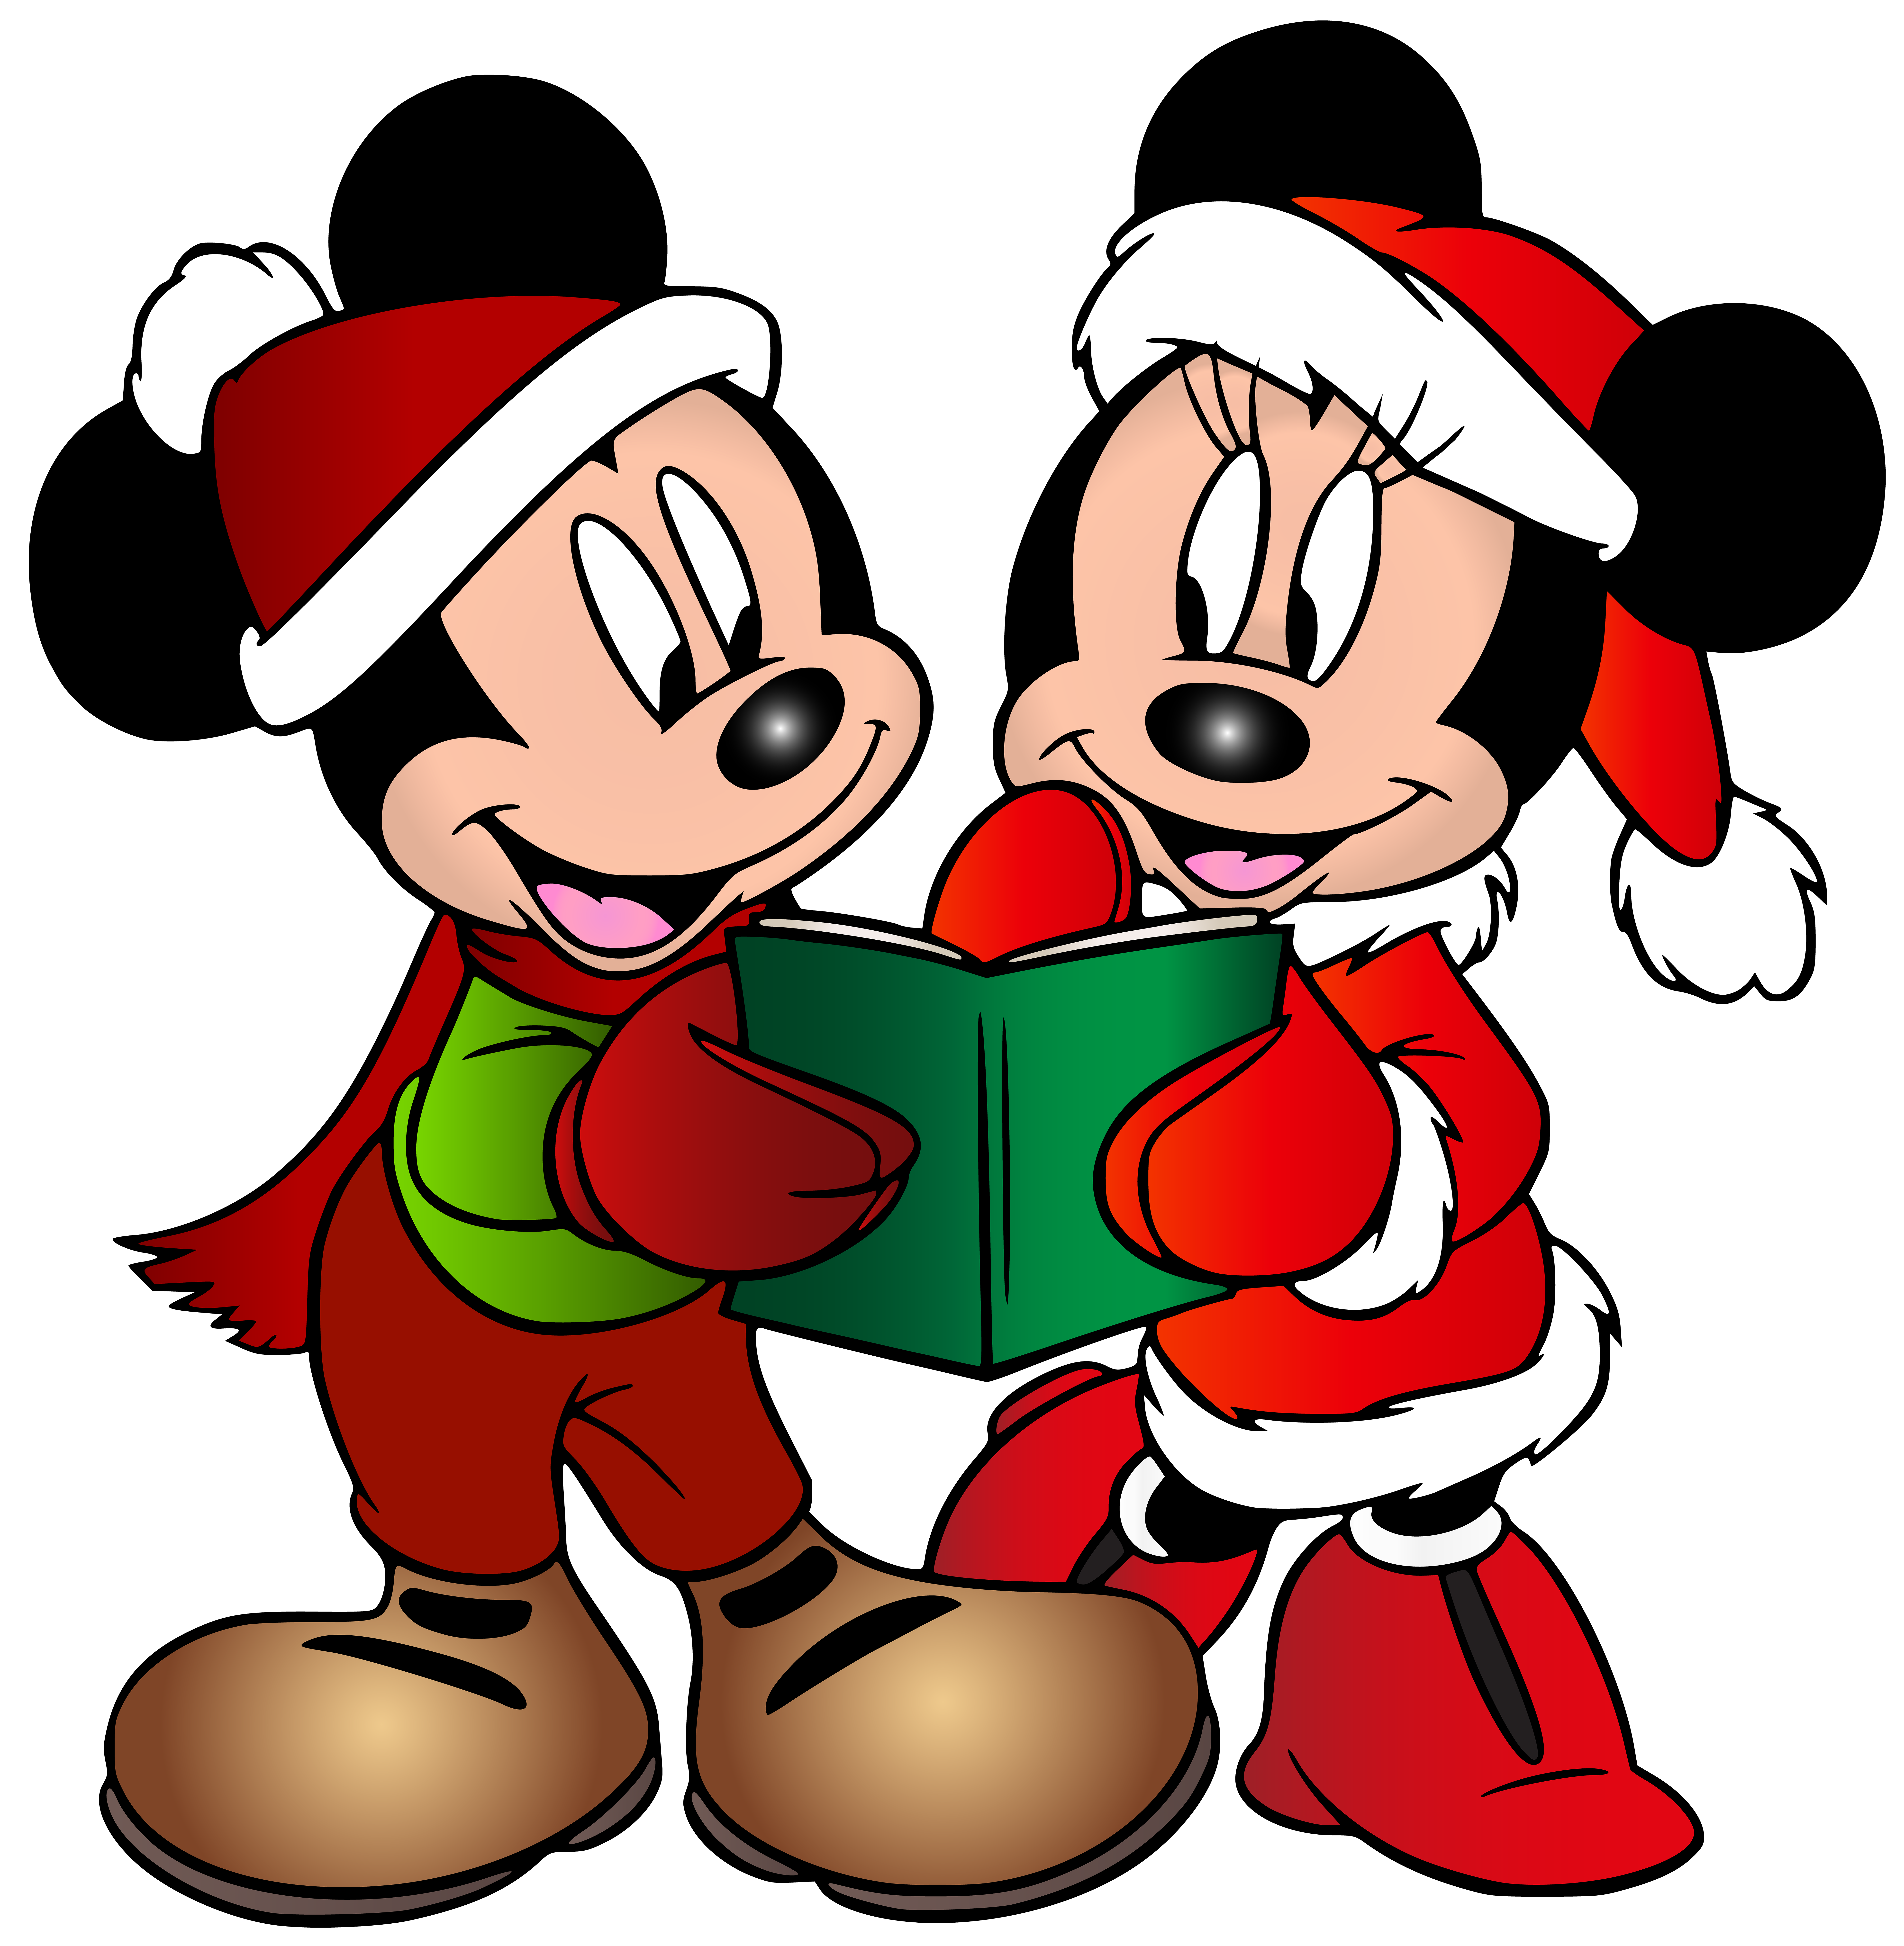 Minnie and Mickey Mouse Christmas Free PNG Clip Art Image.